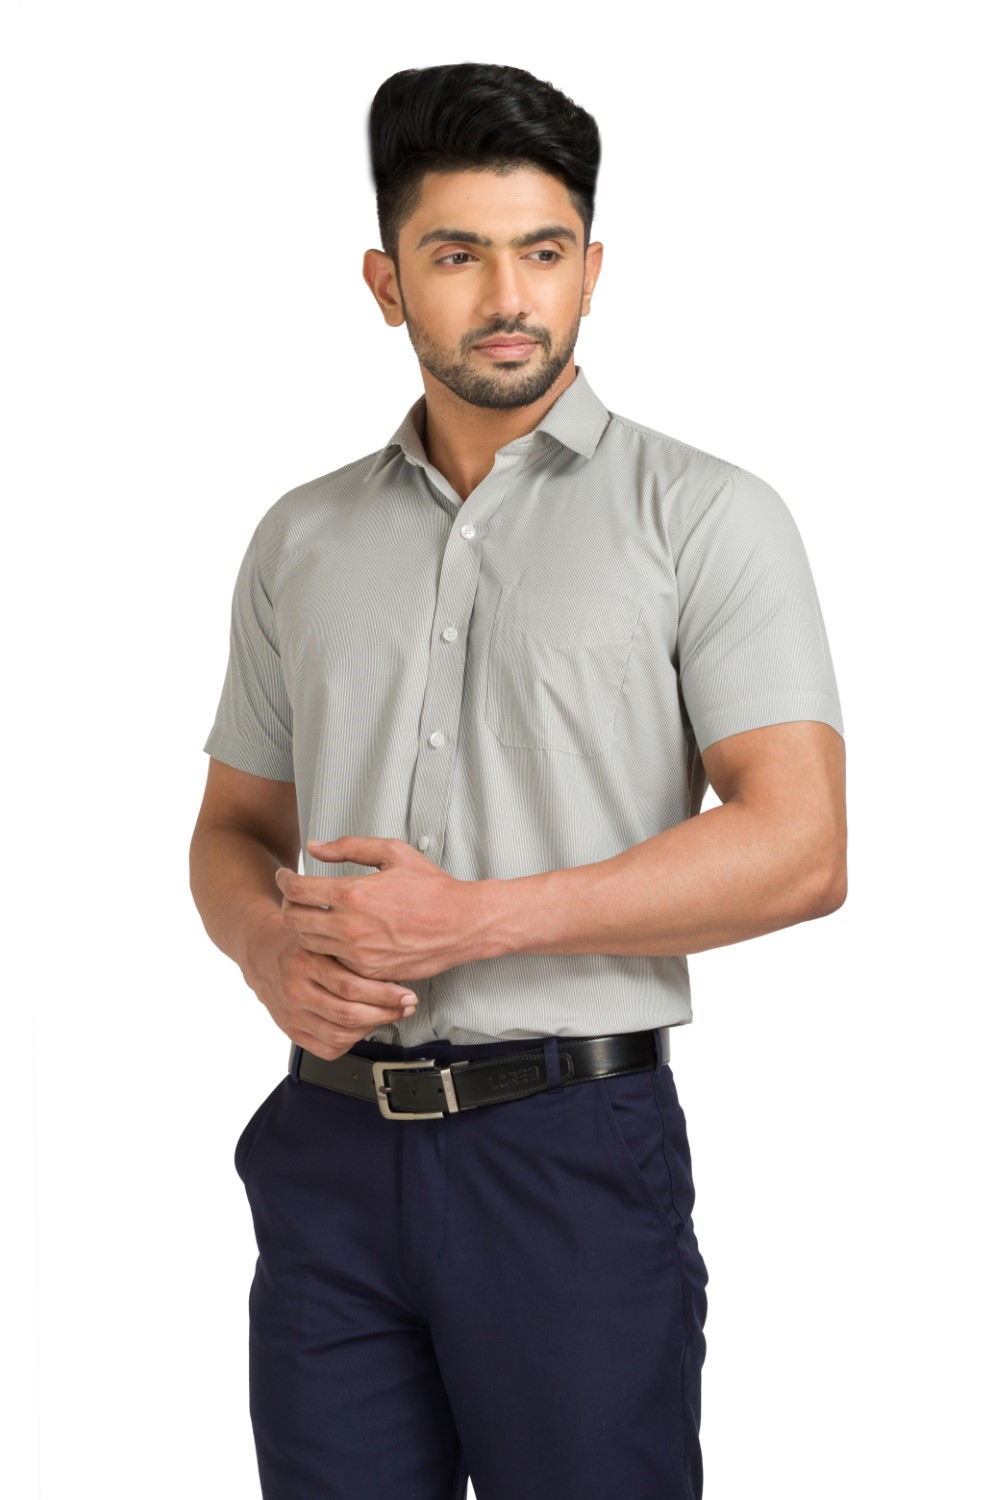 Cotton Blend Grey Striped Half Shirt With A Regular fit and Easy Maintenance